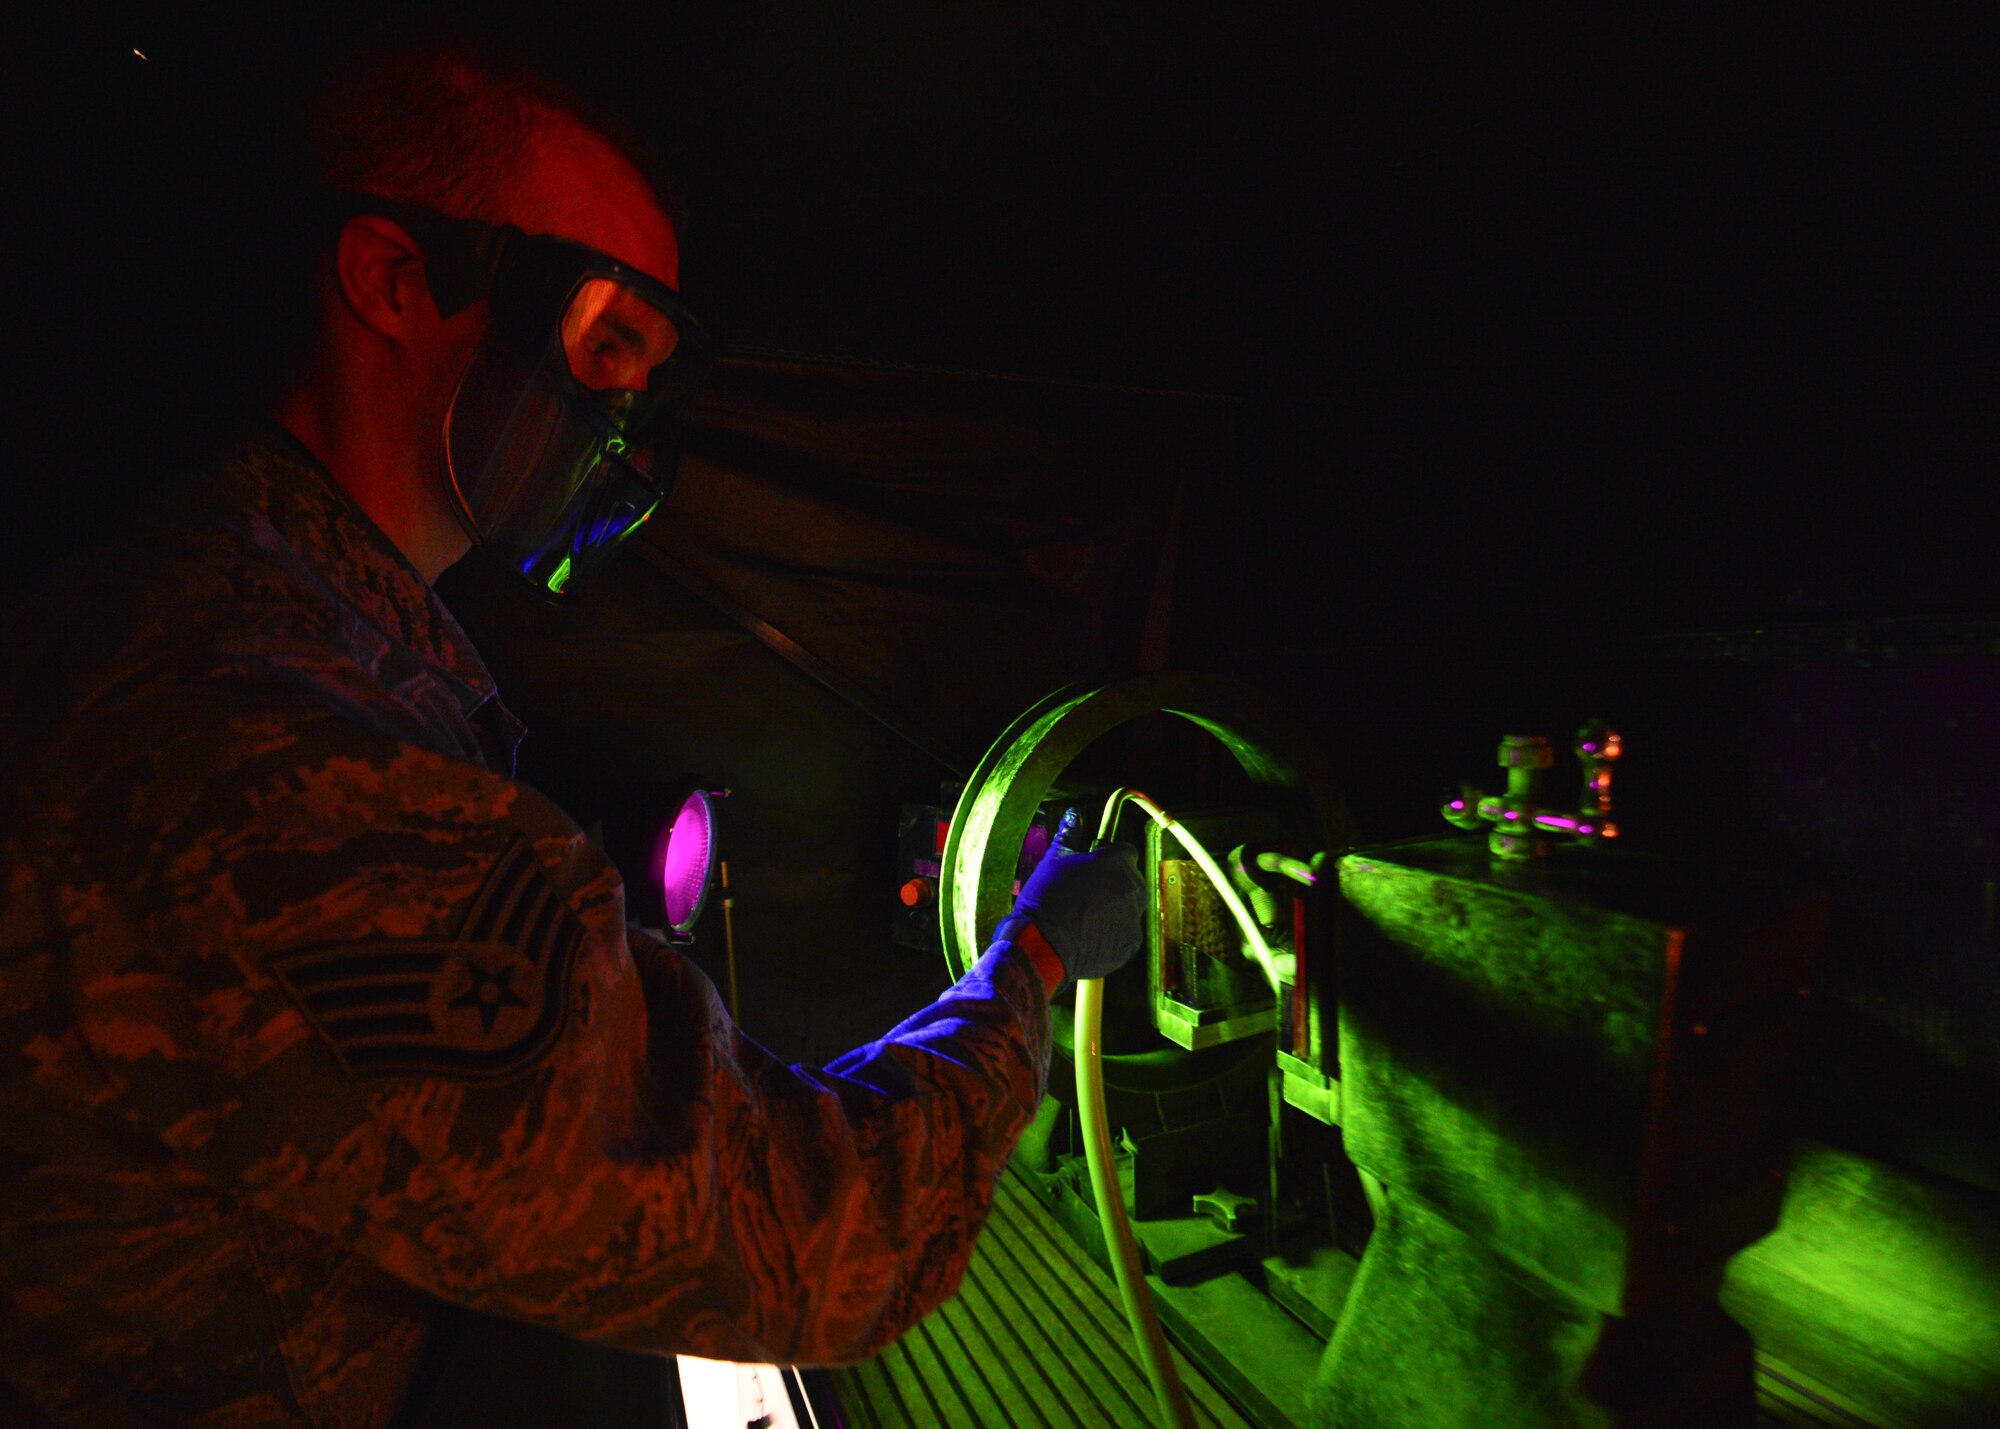 Staff Sgt. Chad Ericksen conducts particle testing on a crane hook March 13, 2014, at Dover Air Force Base, Del. Ericksen reports the findings of his test into the Parts, Inspection, Turnover (PIT) log that he created in 2012 as a way to better record maintenance records within NDI. Ericksen is a non-destructive inspection craftsman assigned to the 436th Maintenance Squadron. (U.S. Air Force photo/Airman 1st Class William Johnson)